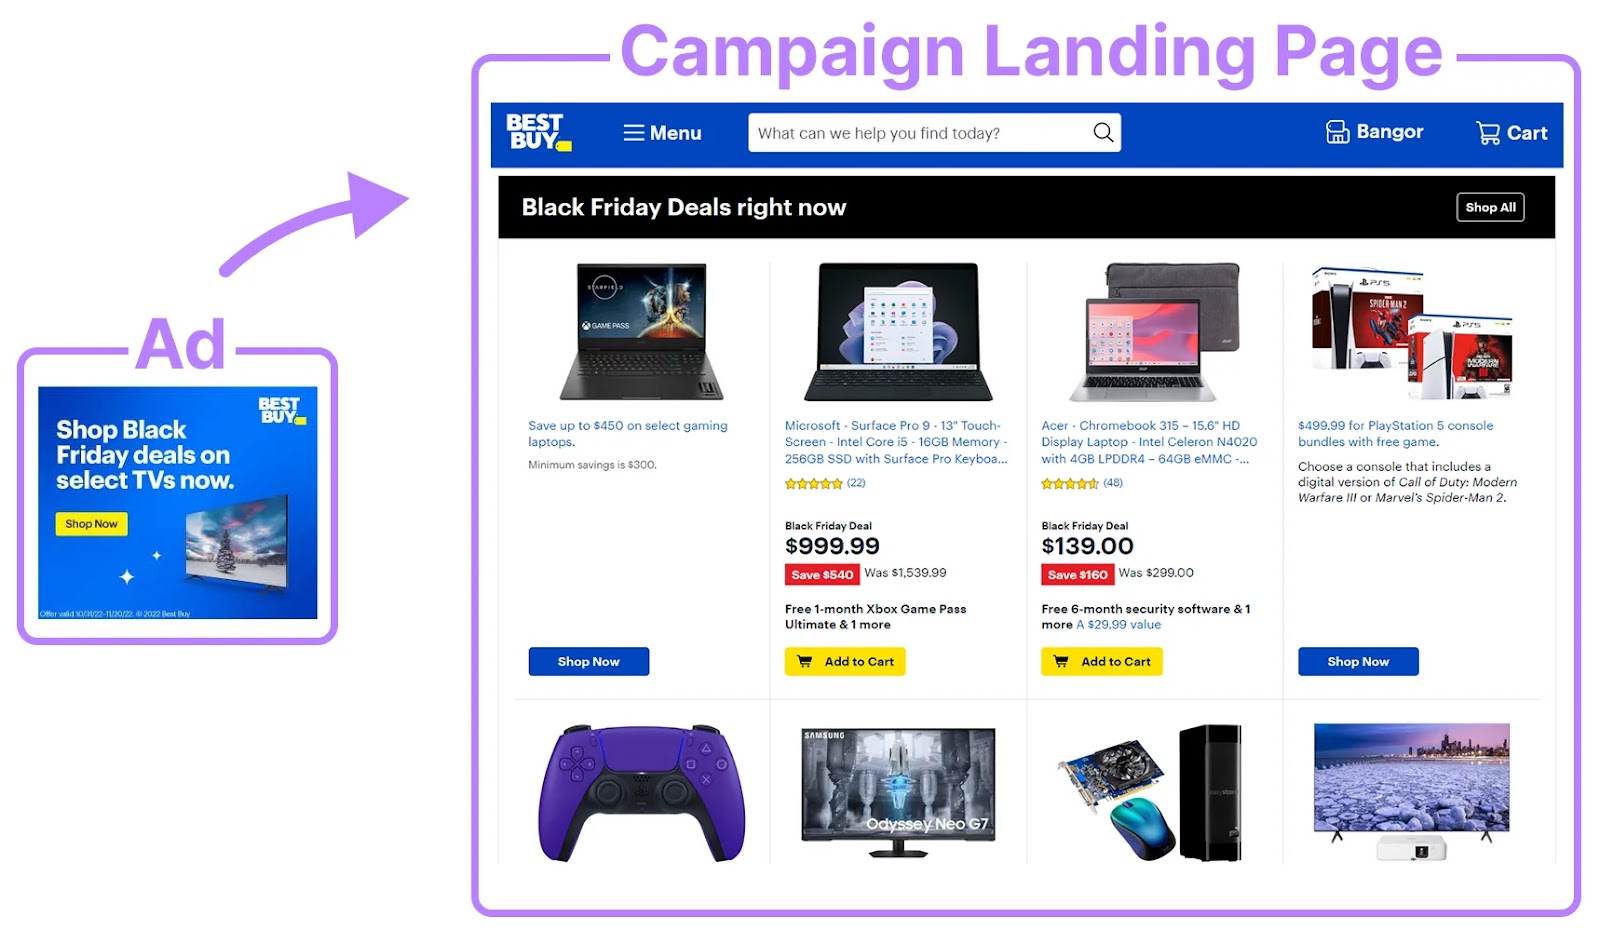 An example of banner ad for Black Friday deals and "Black Friday deals" landing page with multiple products